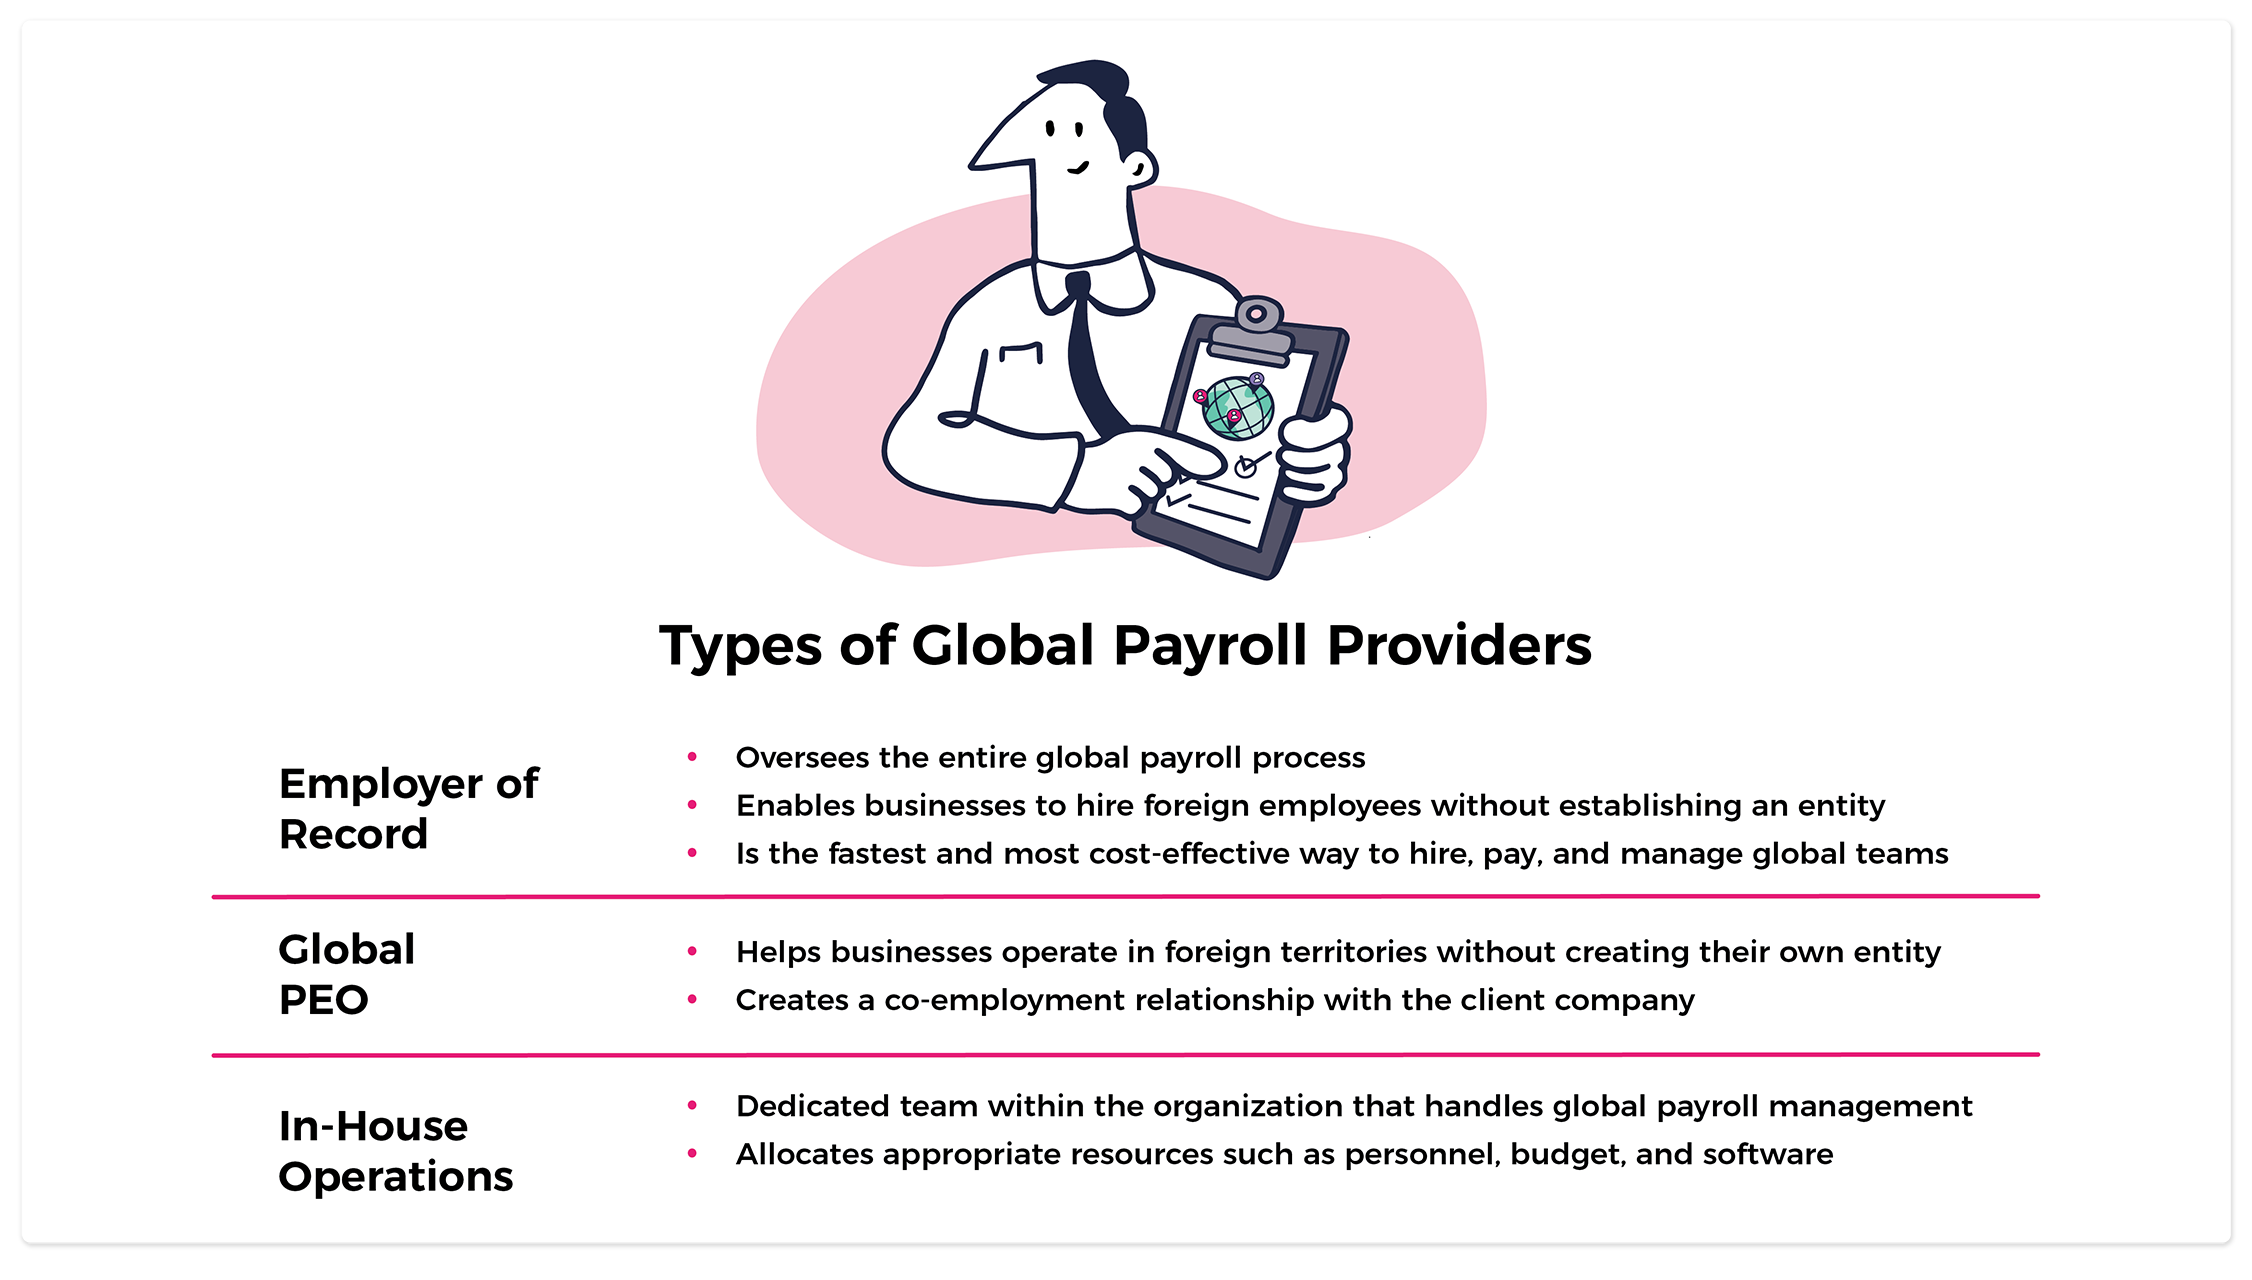 Types of Global Payroll Providers are Employer of Record, Global PEO, and In-House Operations.